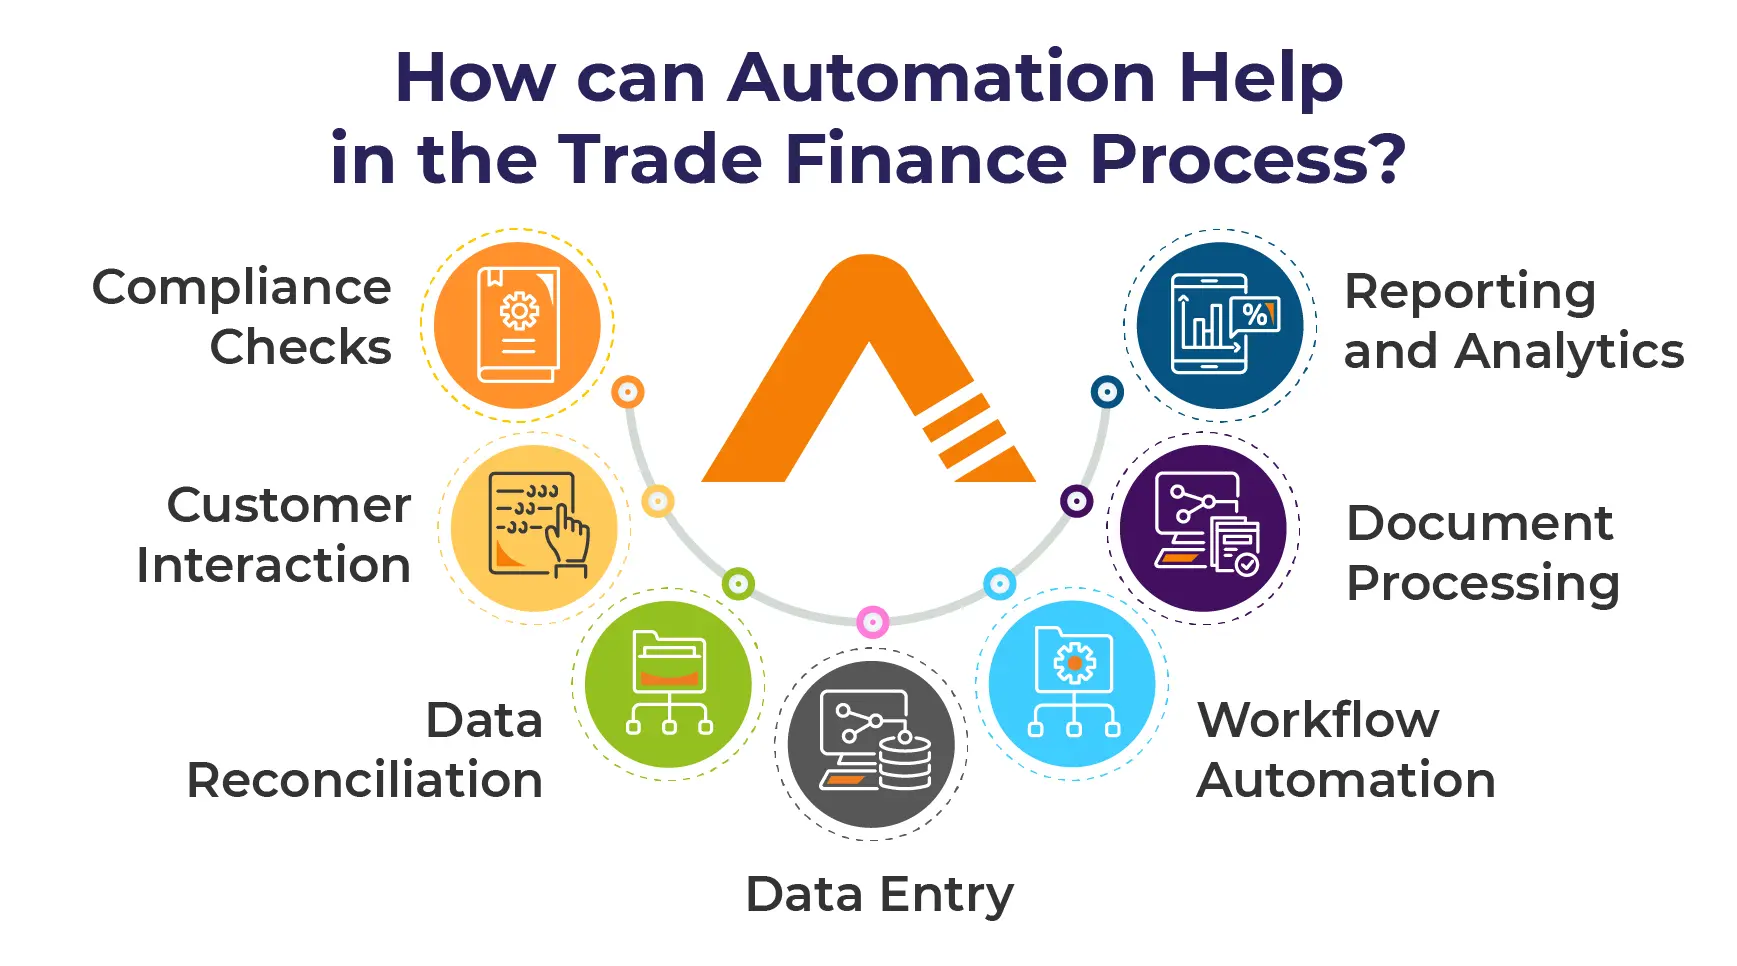 How can Automation Help in the Trade Finance Process?